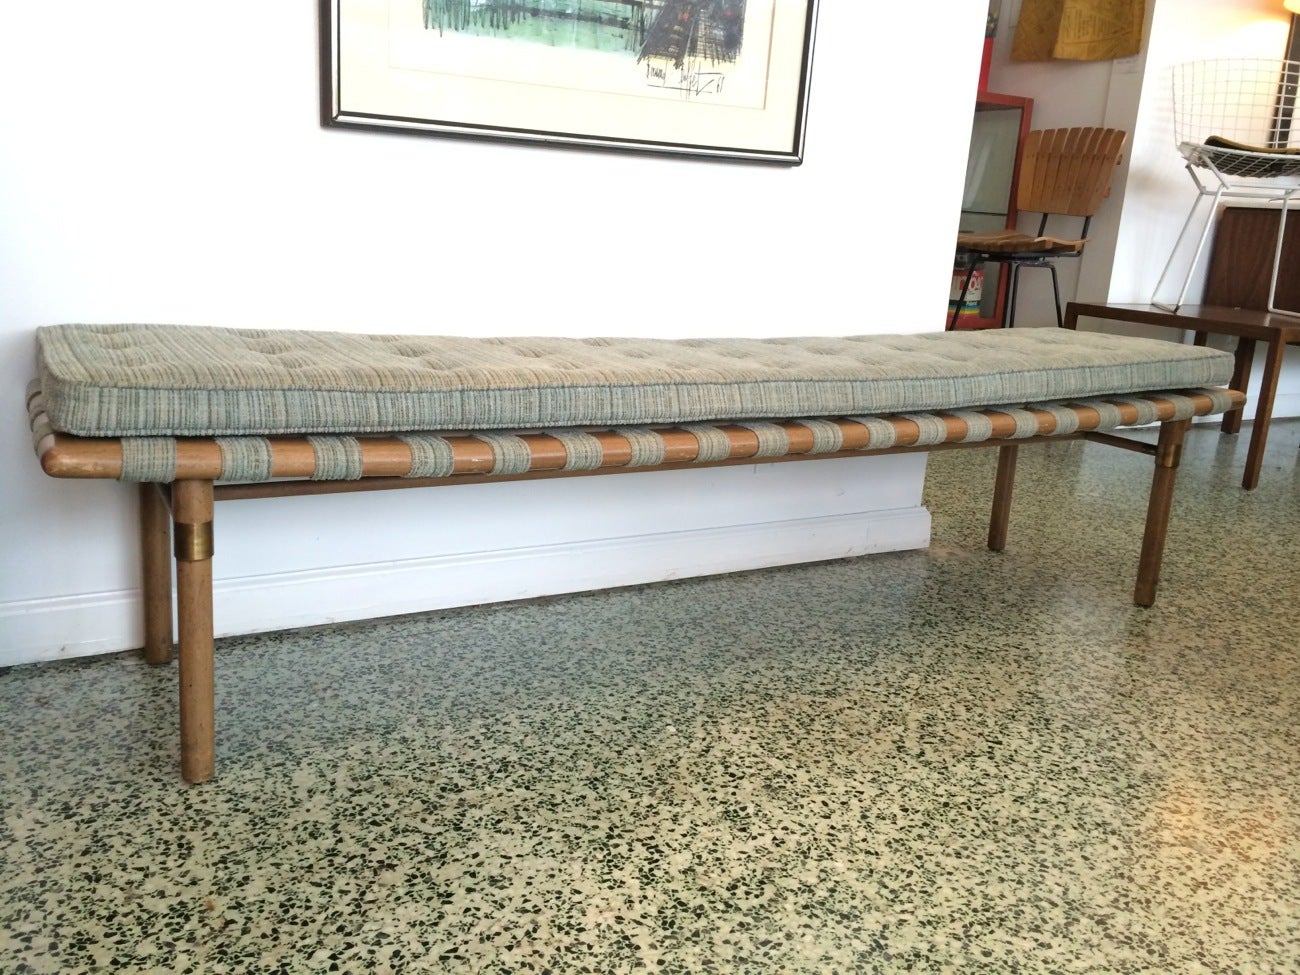 Widdicomb Style Long and Low Upholstered Bench